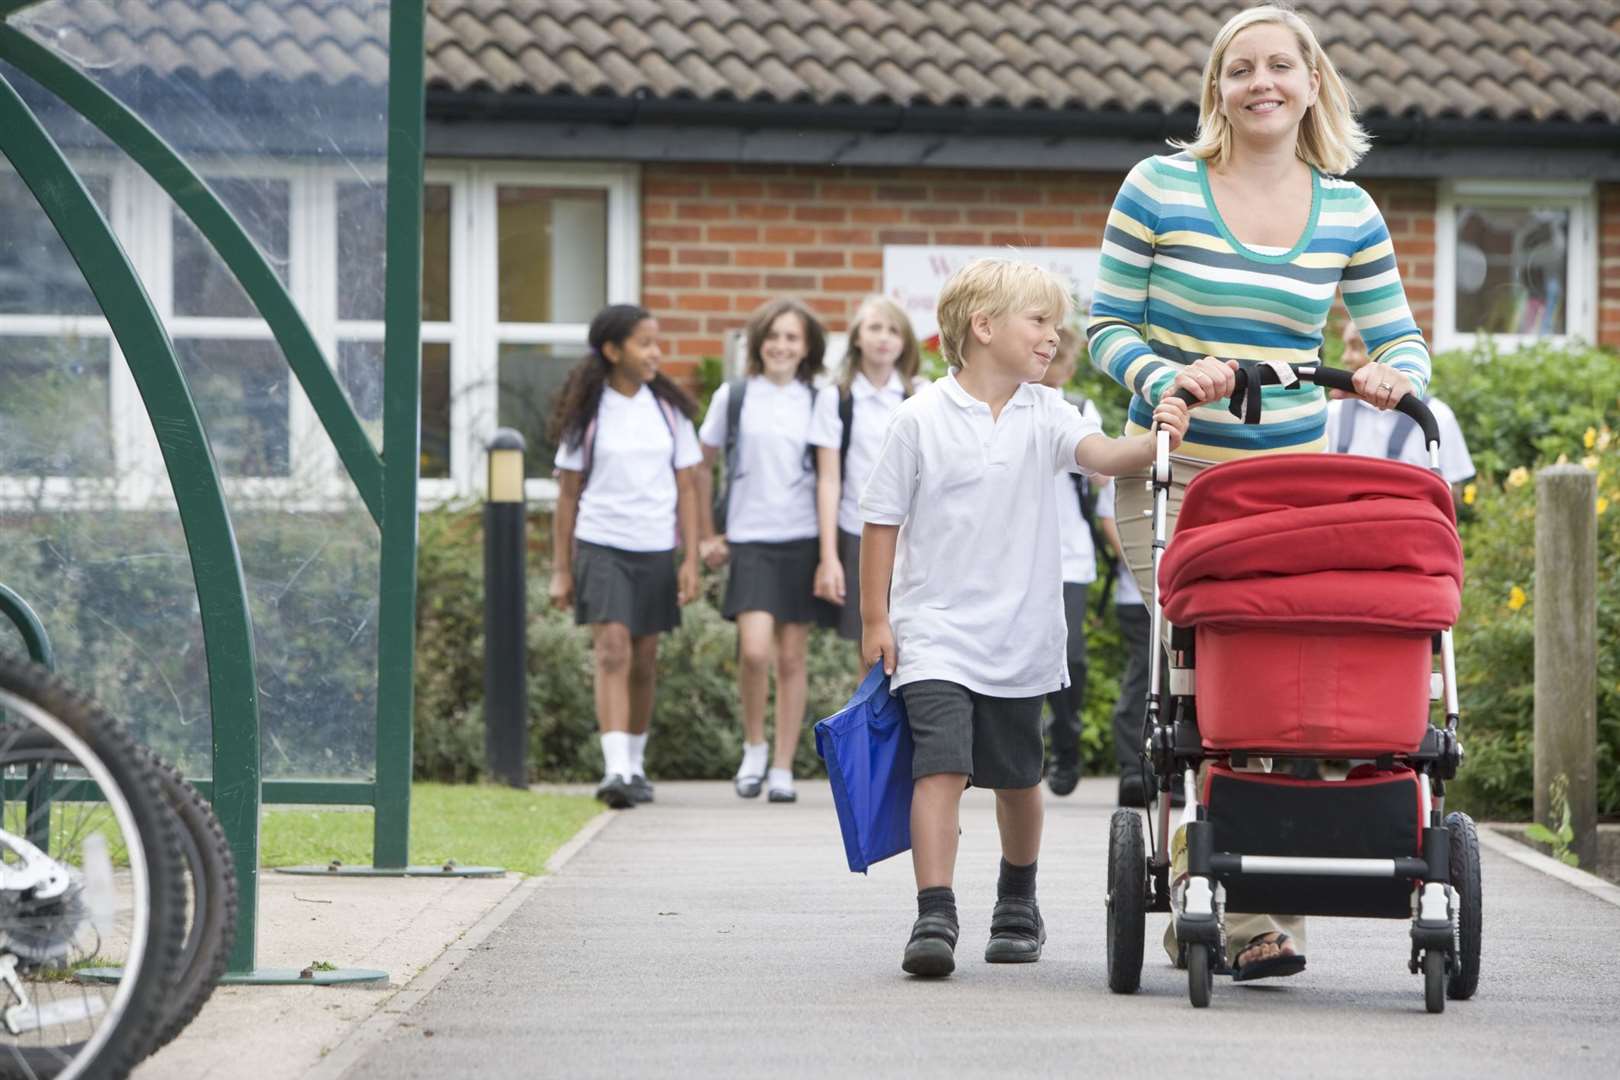 Children in primary school are accompanied by a parent to and from school but in secondary school circumstances often change